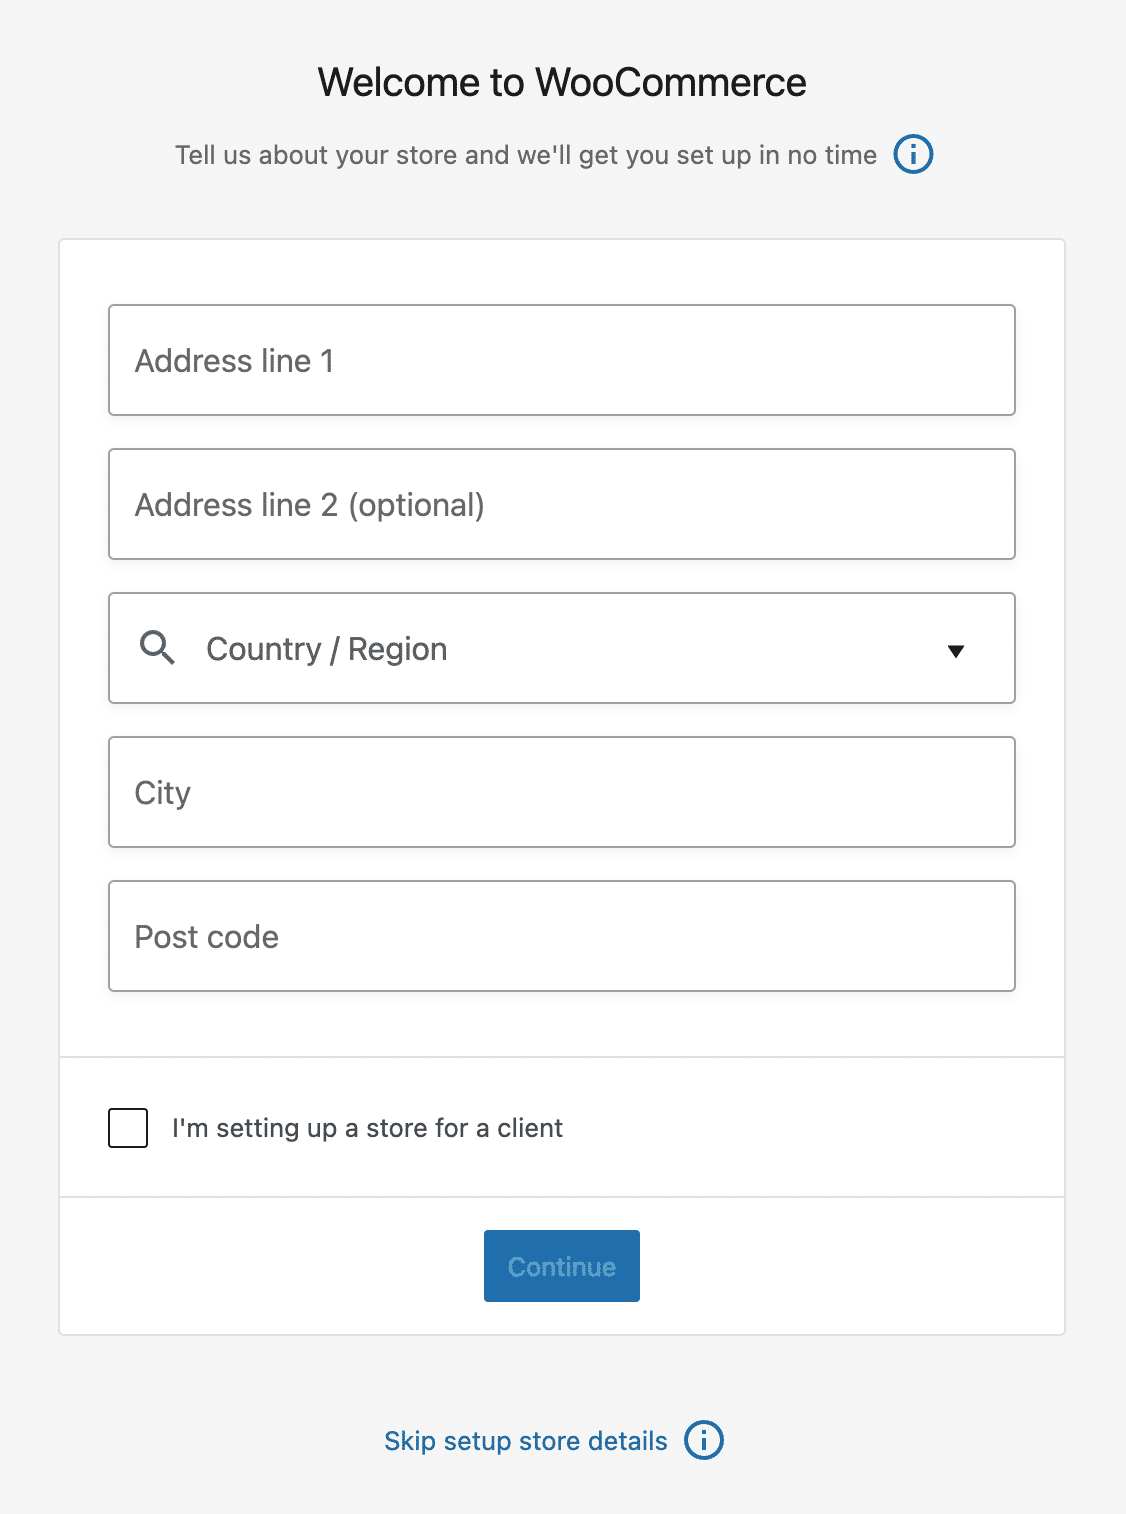 Welcome to WooCommerce form: address, country/Region, City, Post code